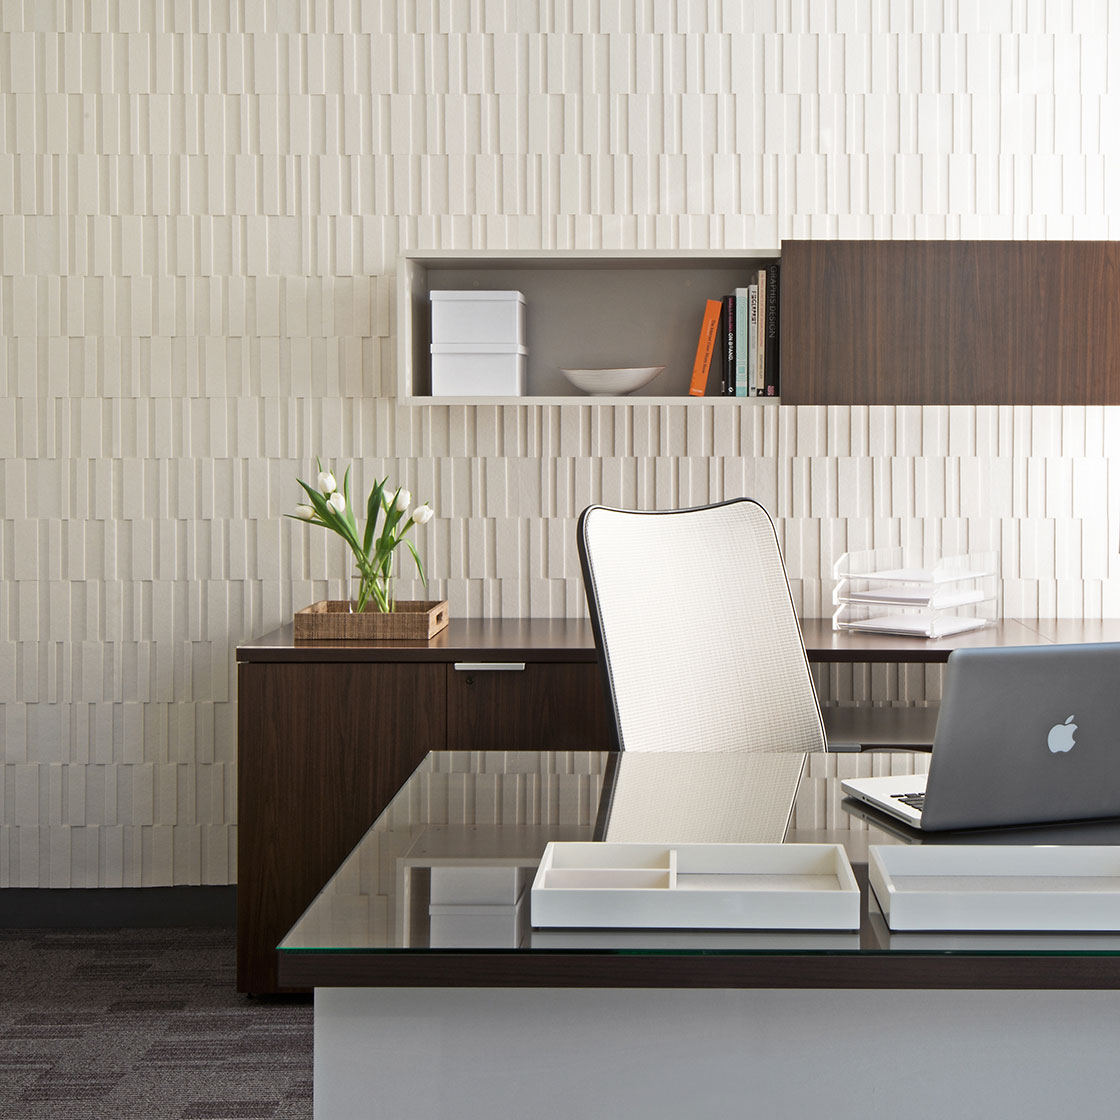 Submaterial FilzFelt index dimensional wallcovering in a neutral shade of white lines an office, providing sound dampening